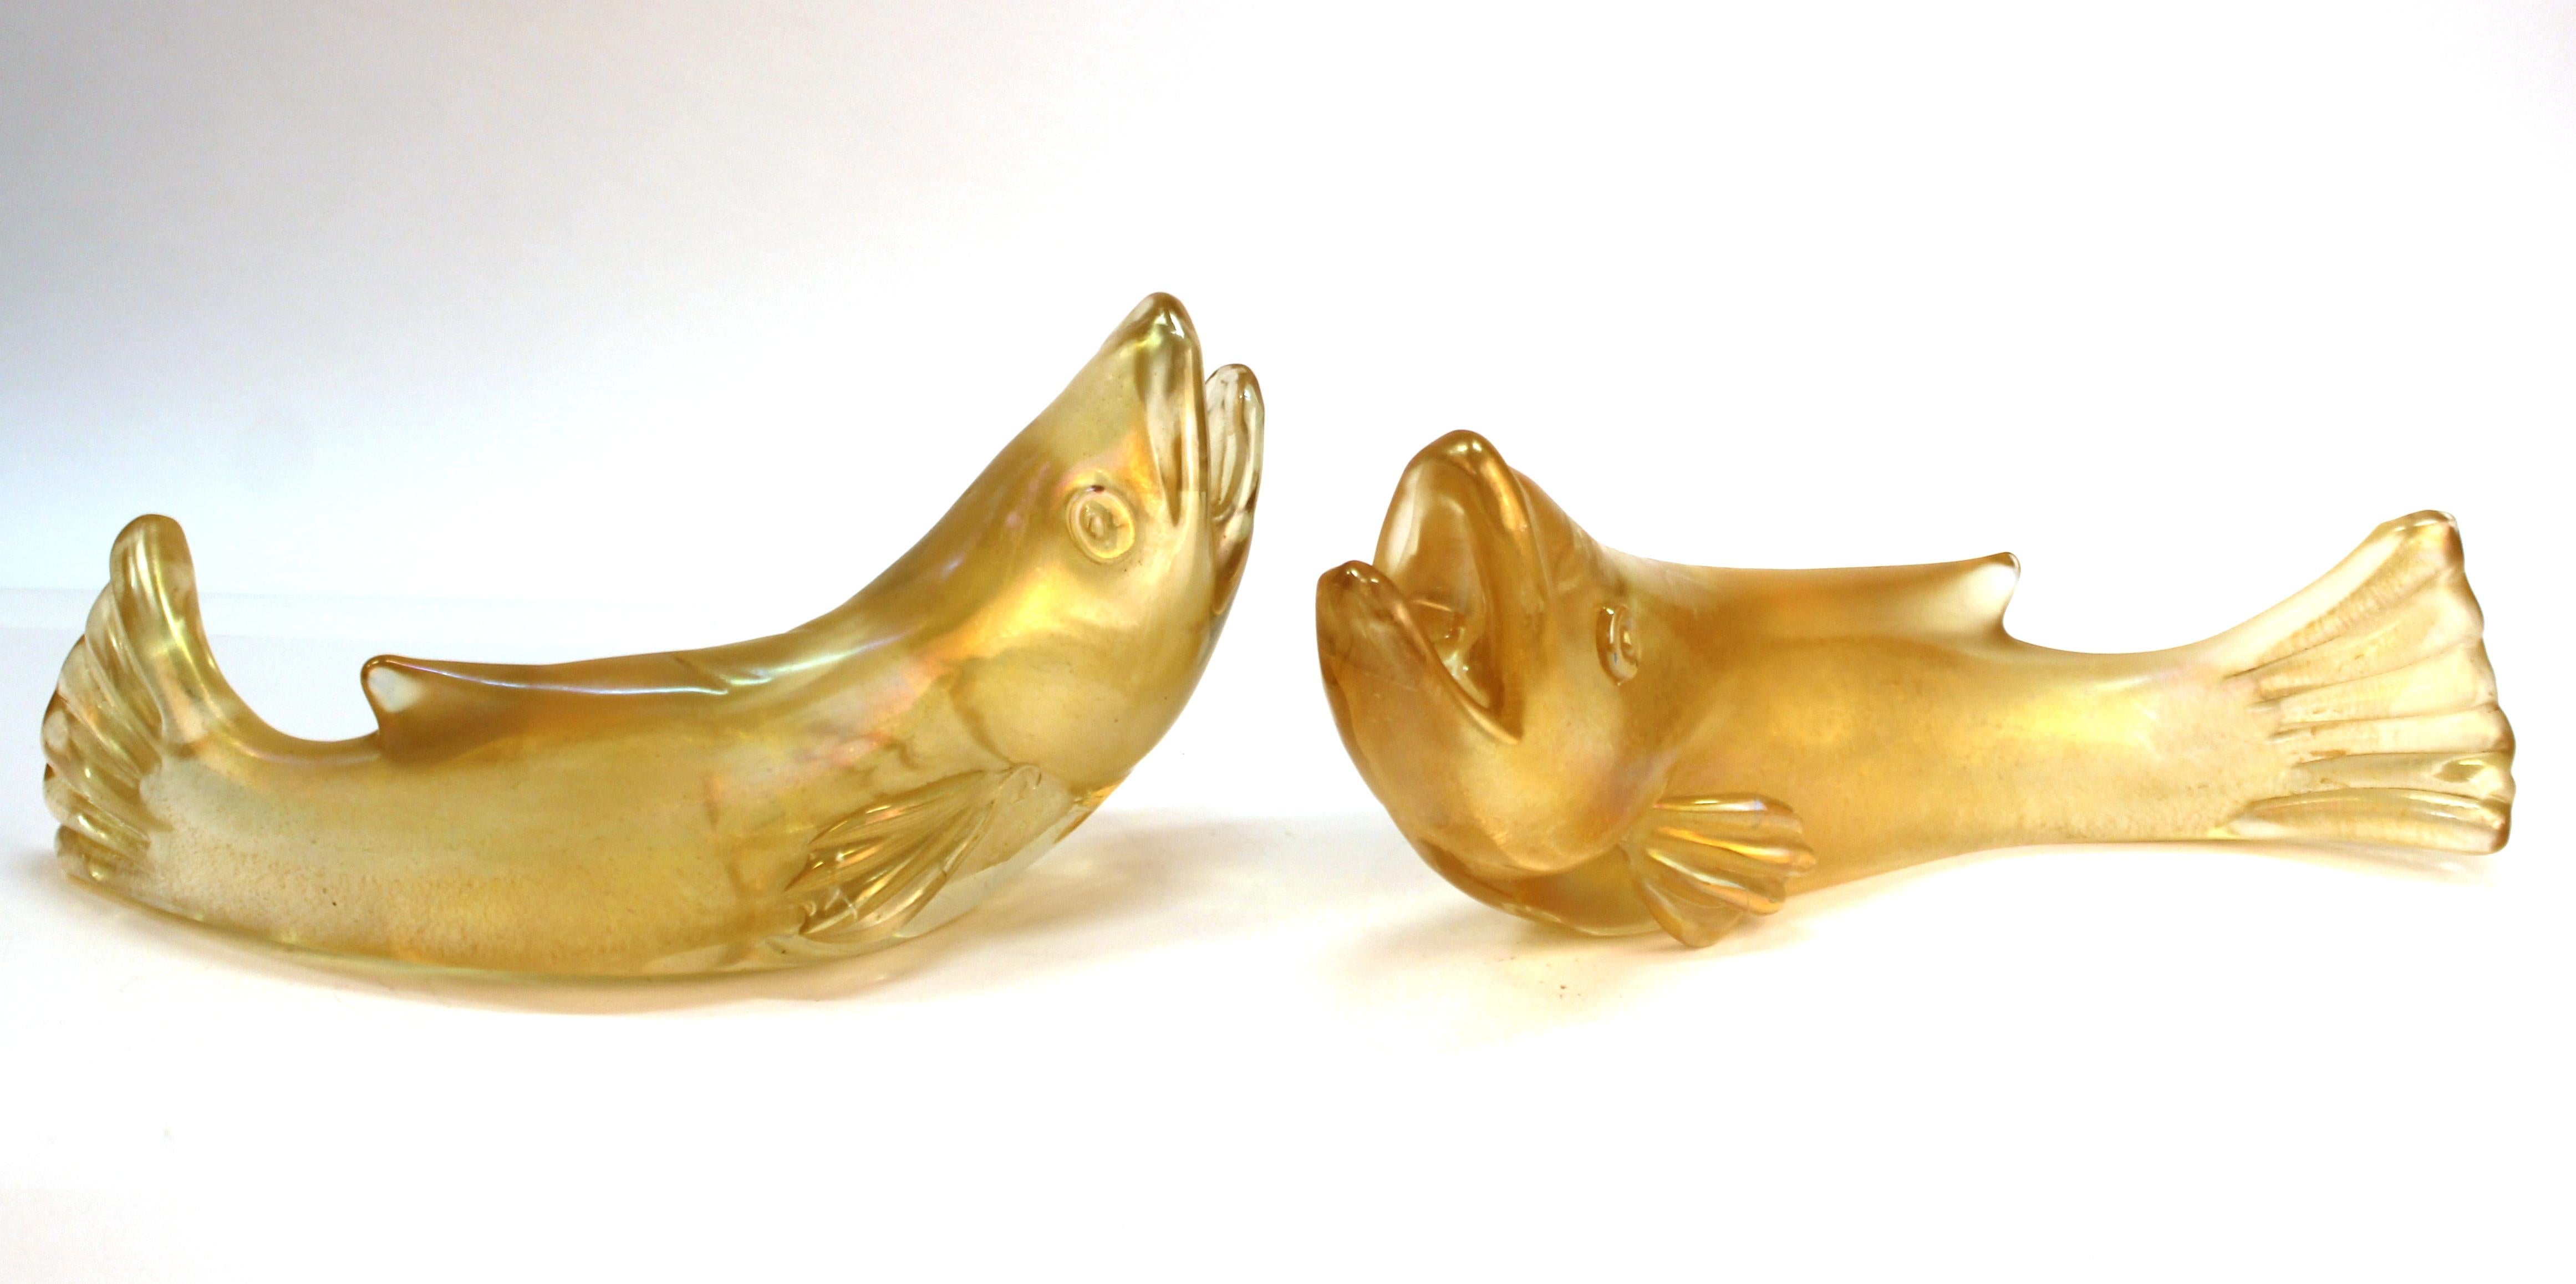 Mid-Century Modern pair of Italian Murano glass fish made by Flavio Poli for Seguso in bullicante glass with gold inclusions. The pair has 'Made In Italy' marks on the bottom and is in great vintage condition with age-appropriate wear.